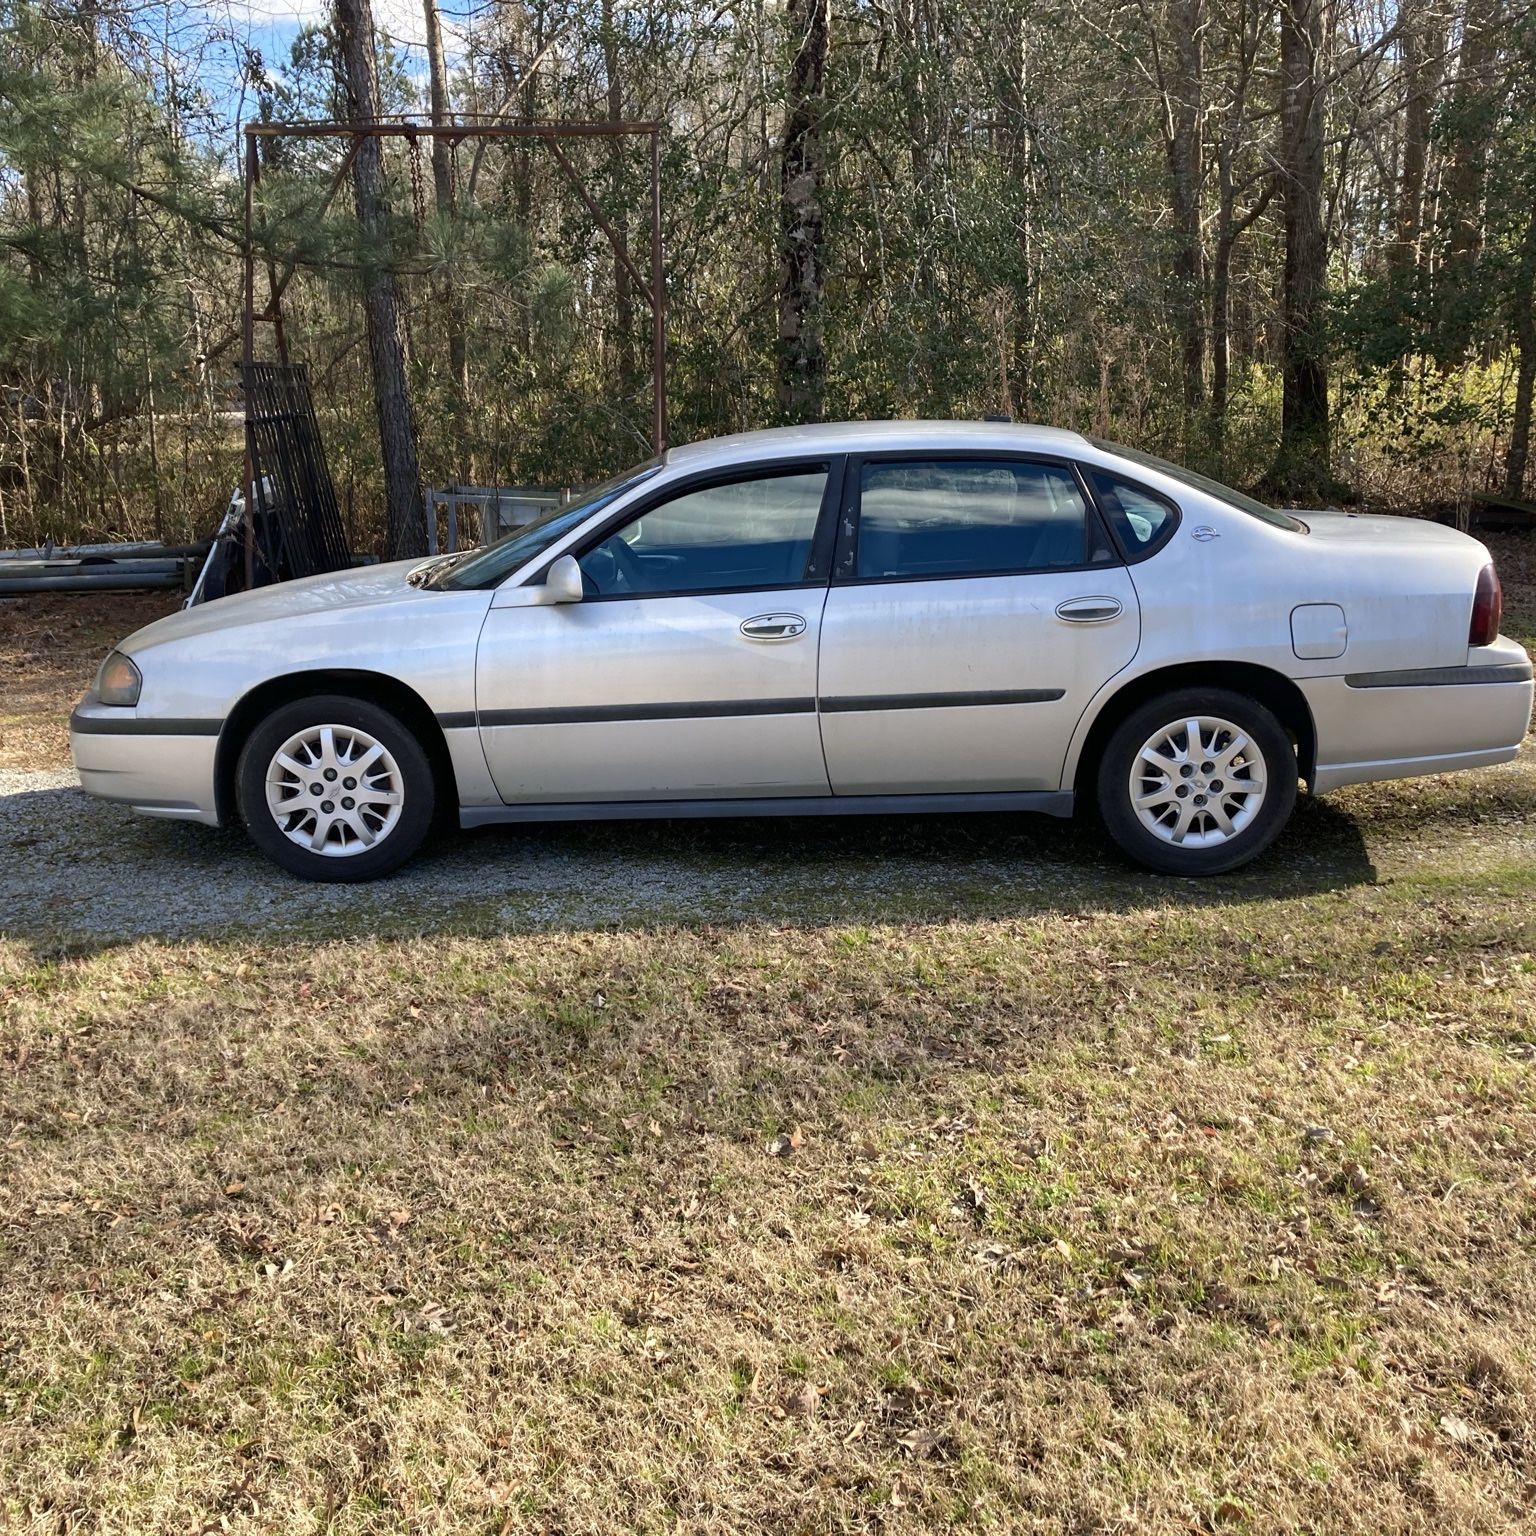 2001 CHEVY IMPALA RUN AND LOOK GREAT !!!(need Transmission Work )